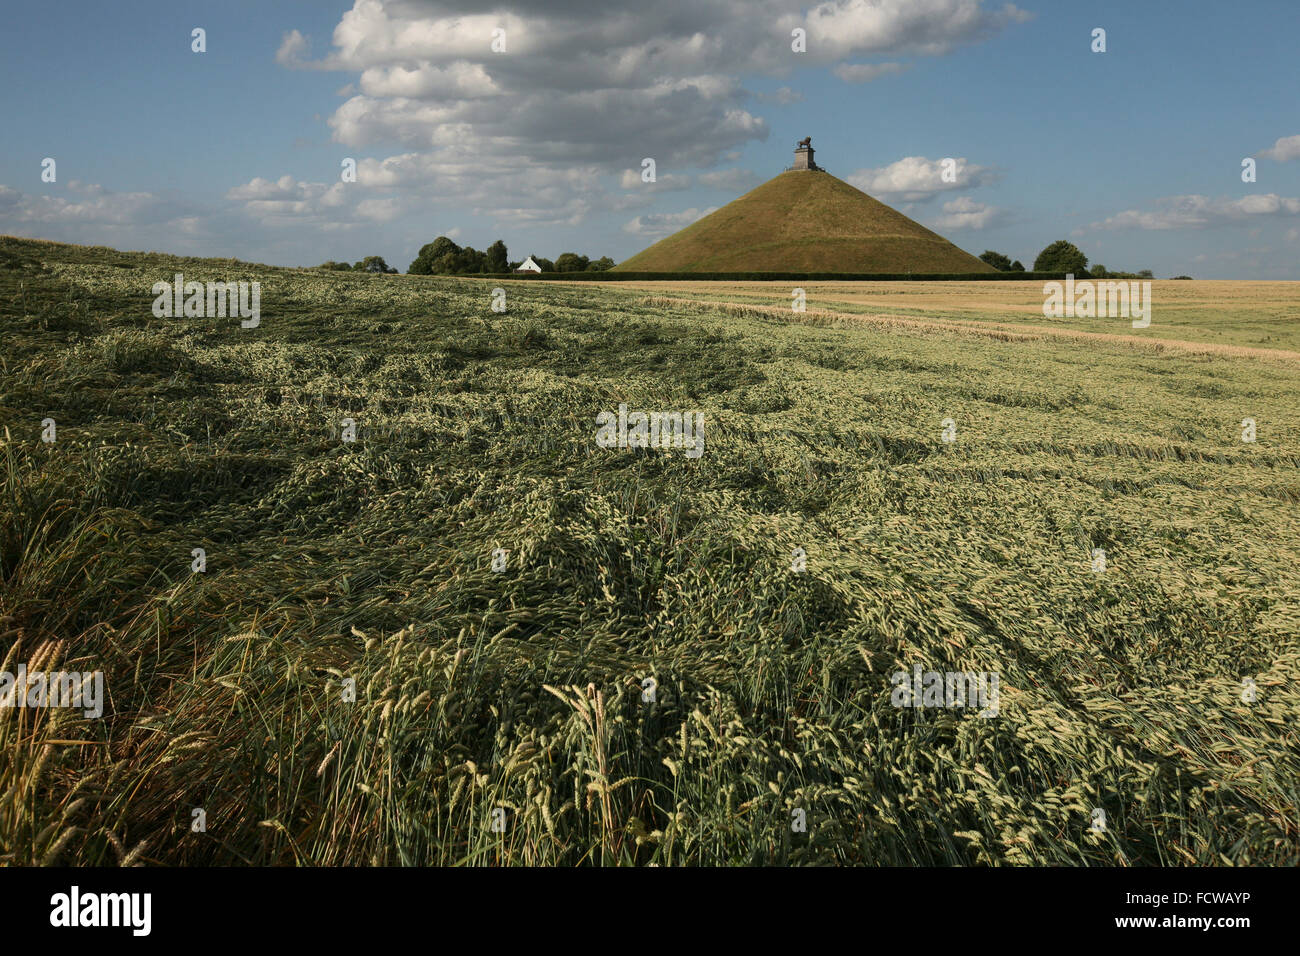 Lion's Mound over the battlefield of the Battle of Waterloo (1815) near Brussels, Belgium. Stock Photo